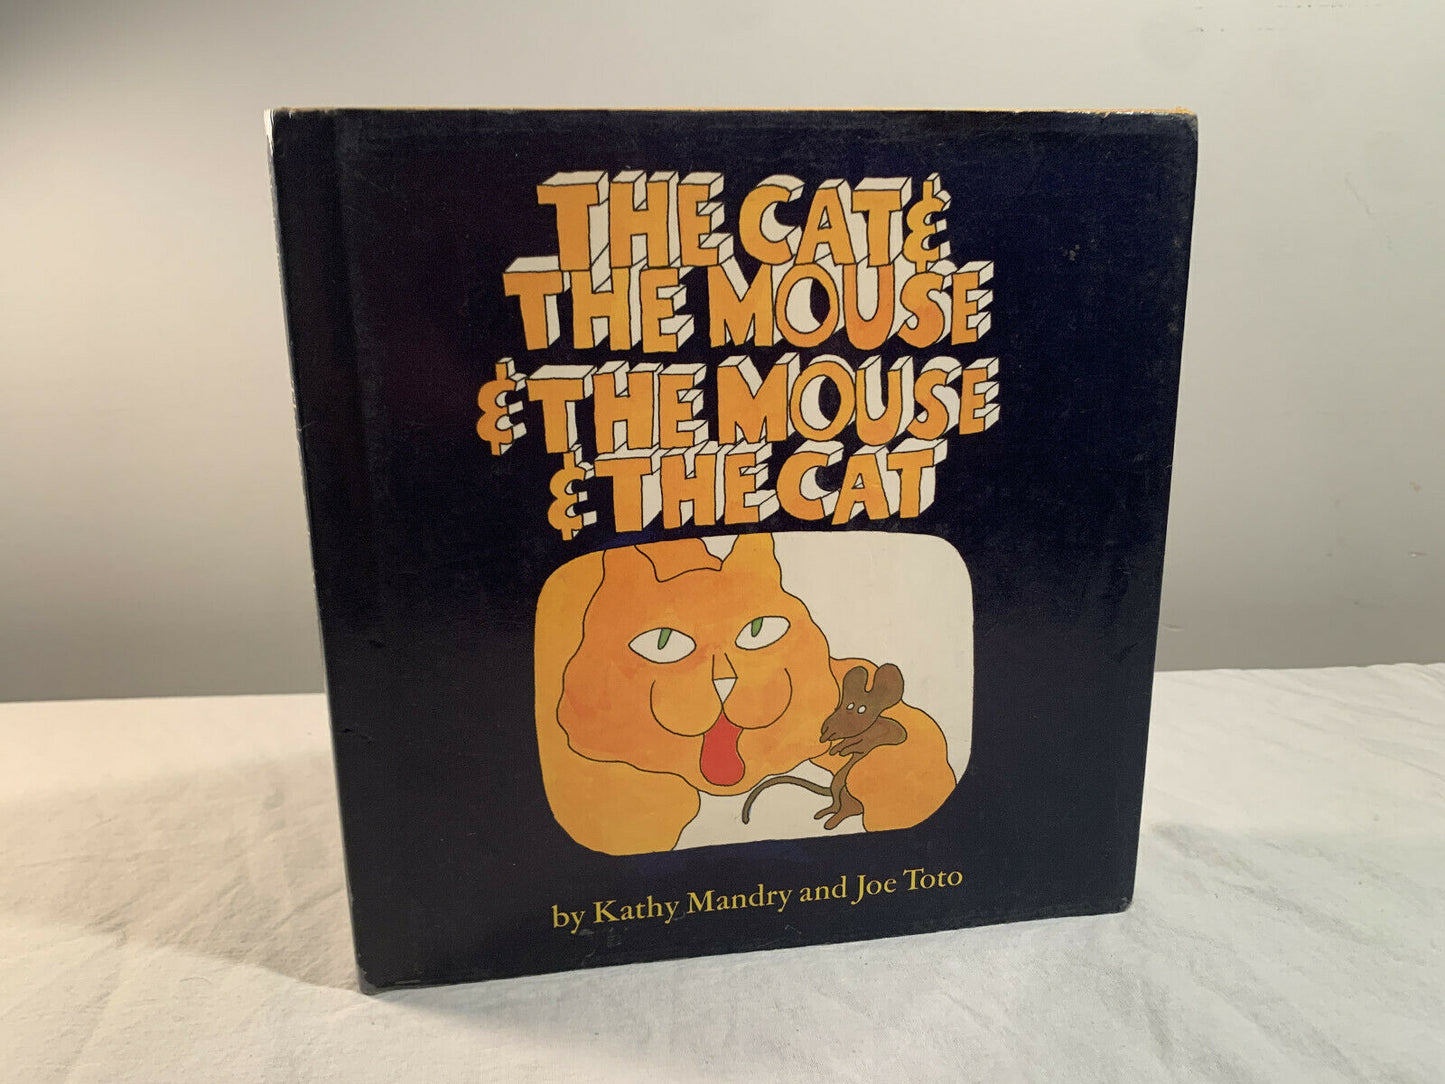 The Cat & the Mouse & the Mouse & the Cat, 1972